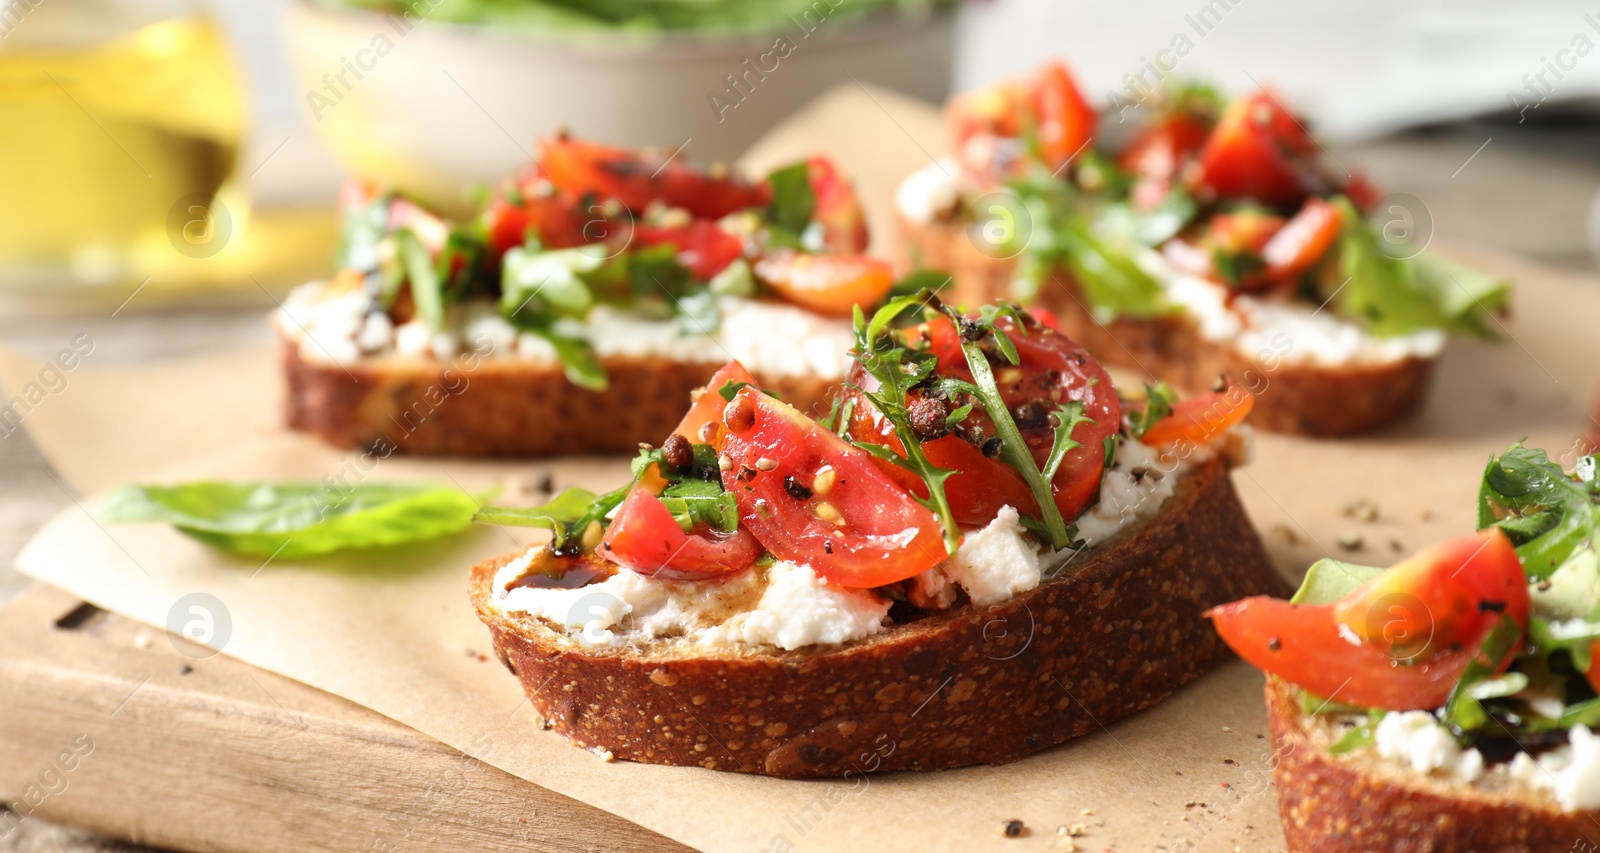 Photo of Delicious ricotta bruschettas with tomatoes and arugula on table, closeup